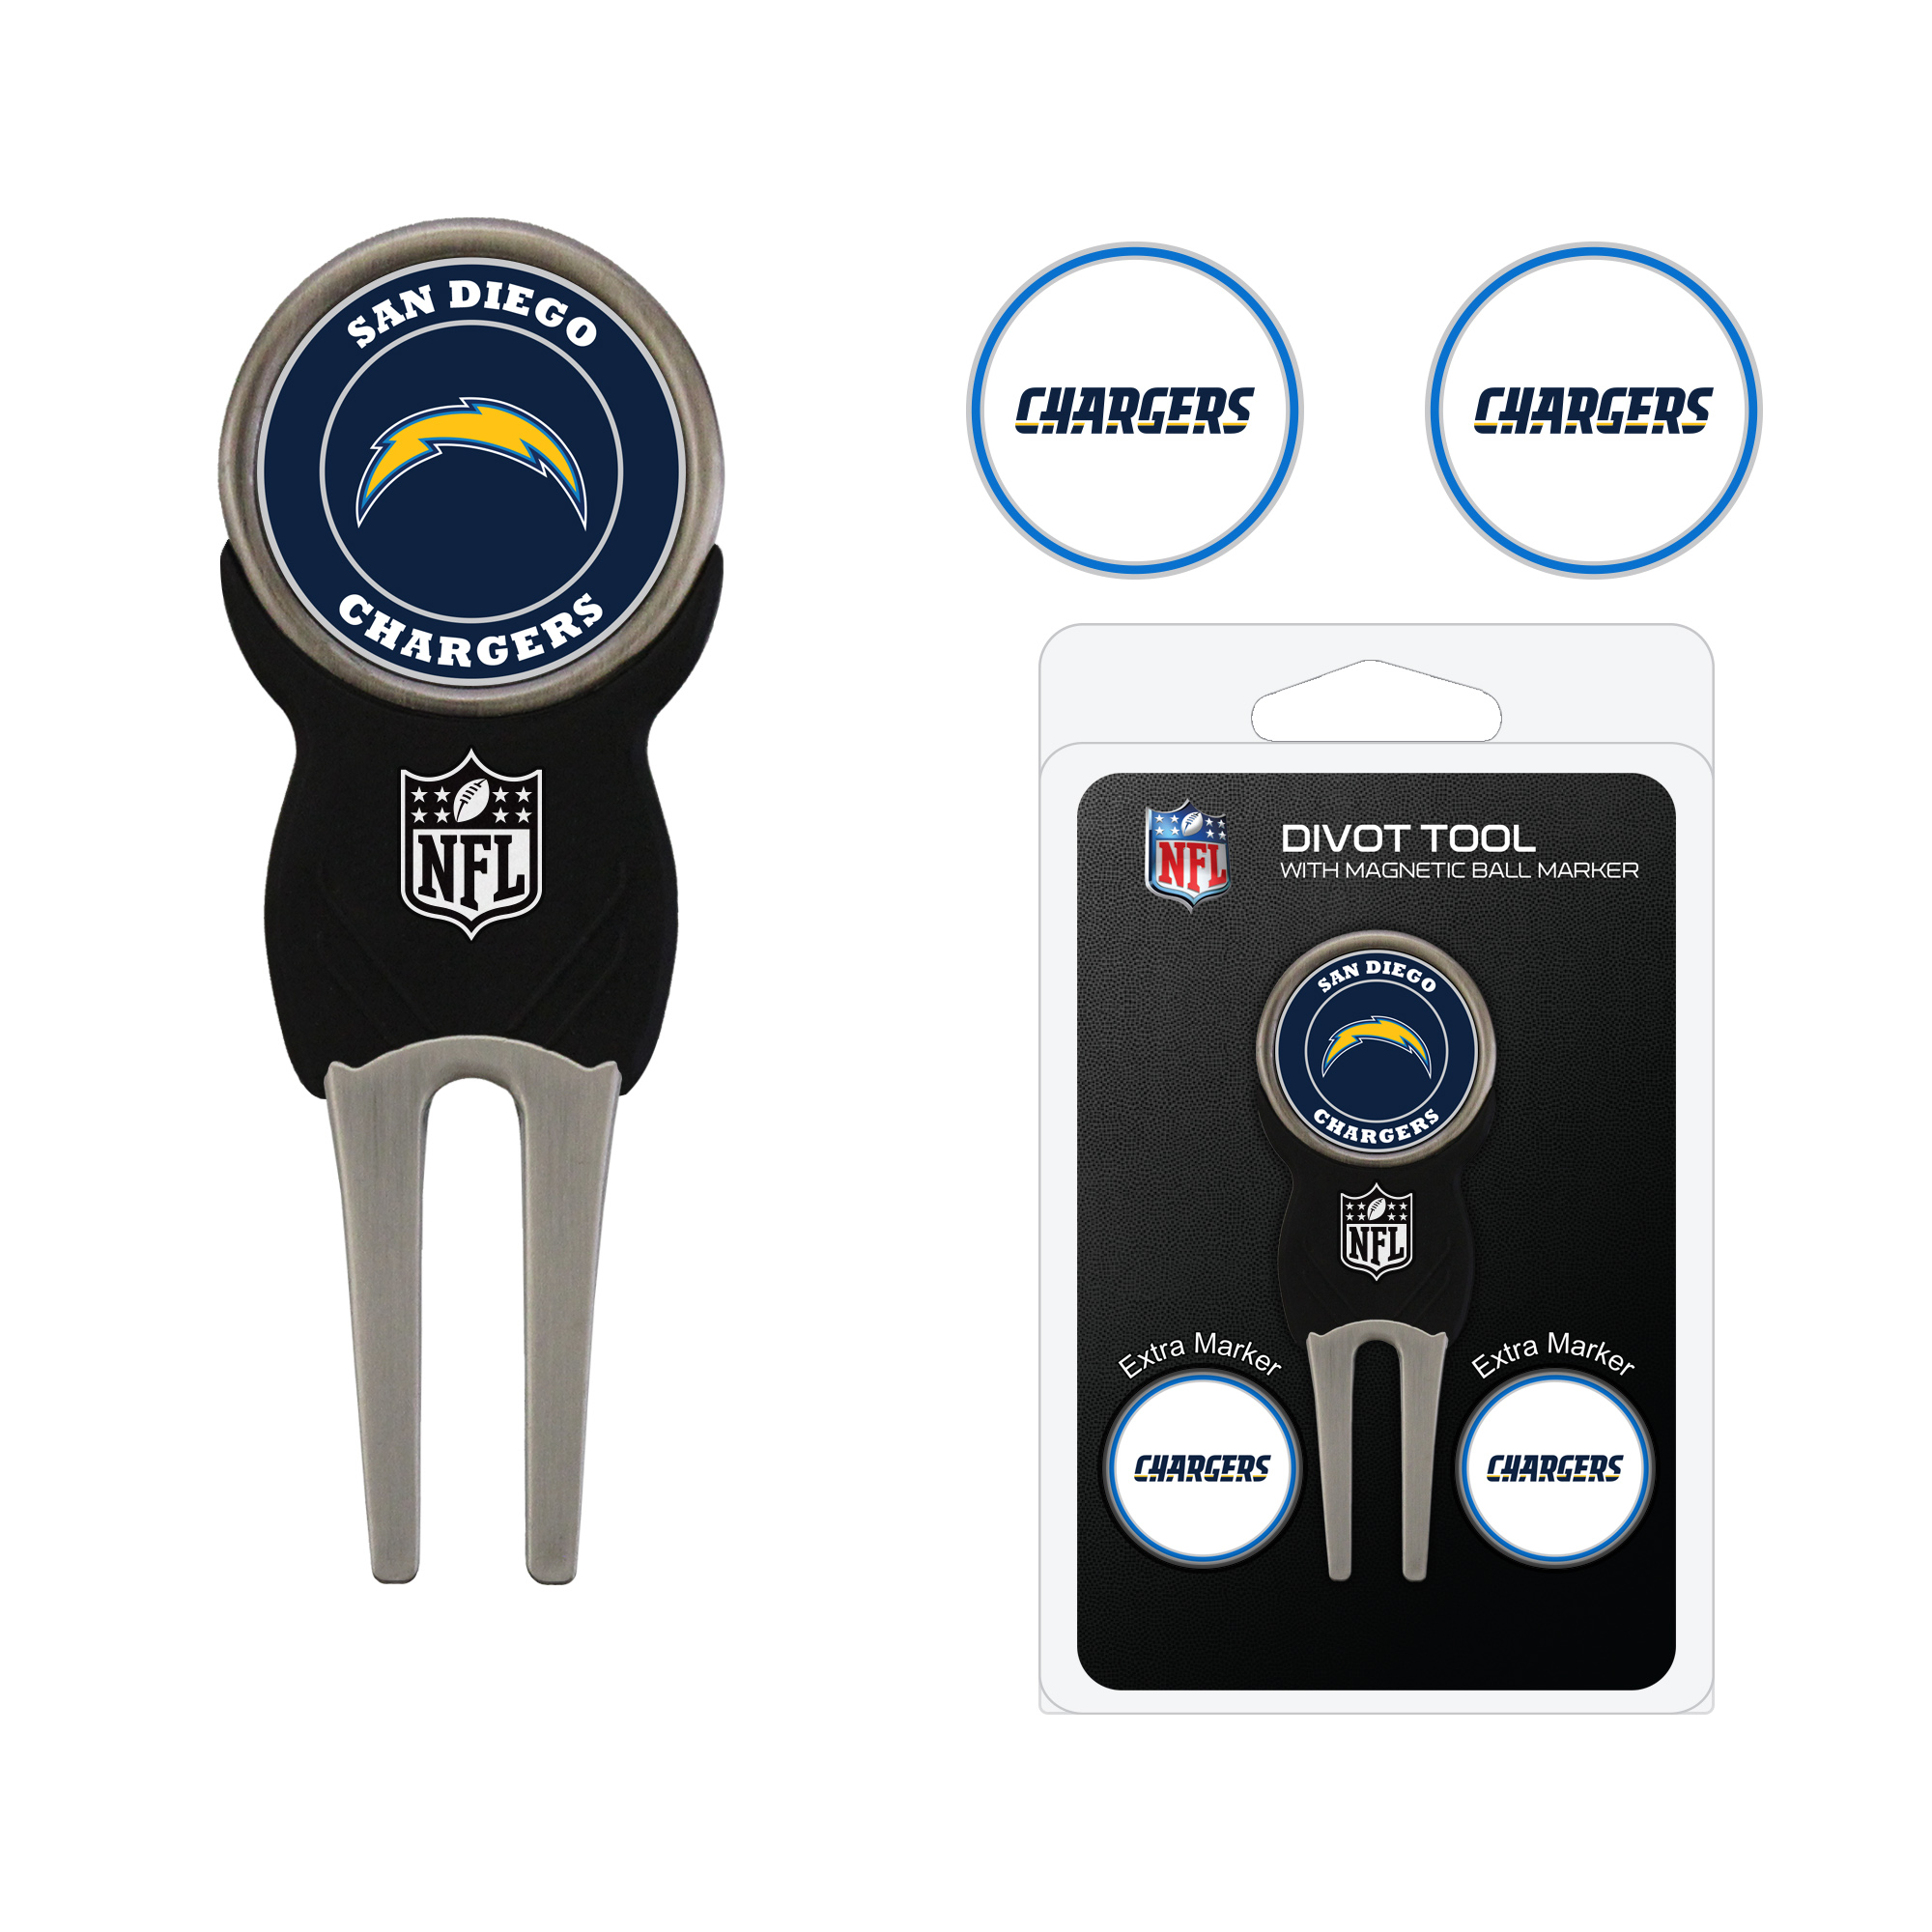 San Diego Chargers Divot Tool Pack